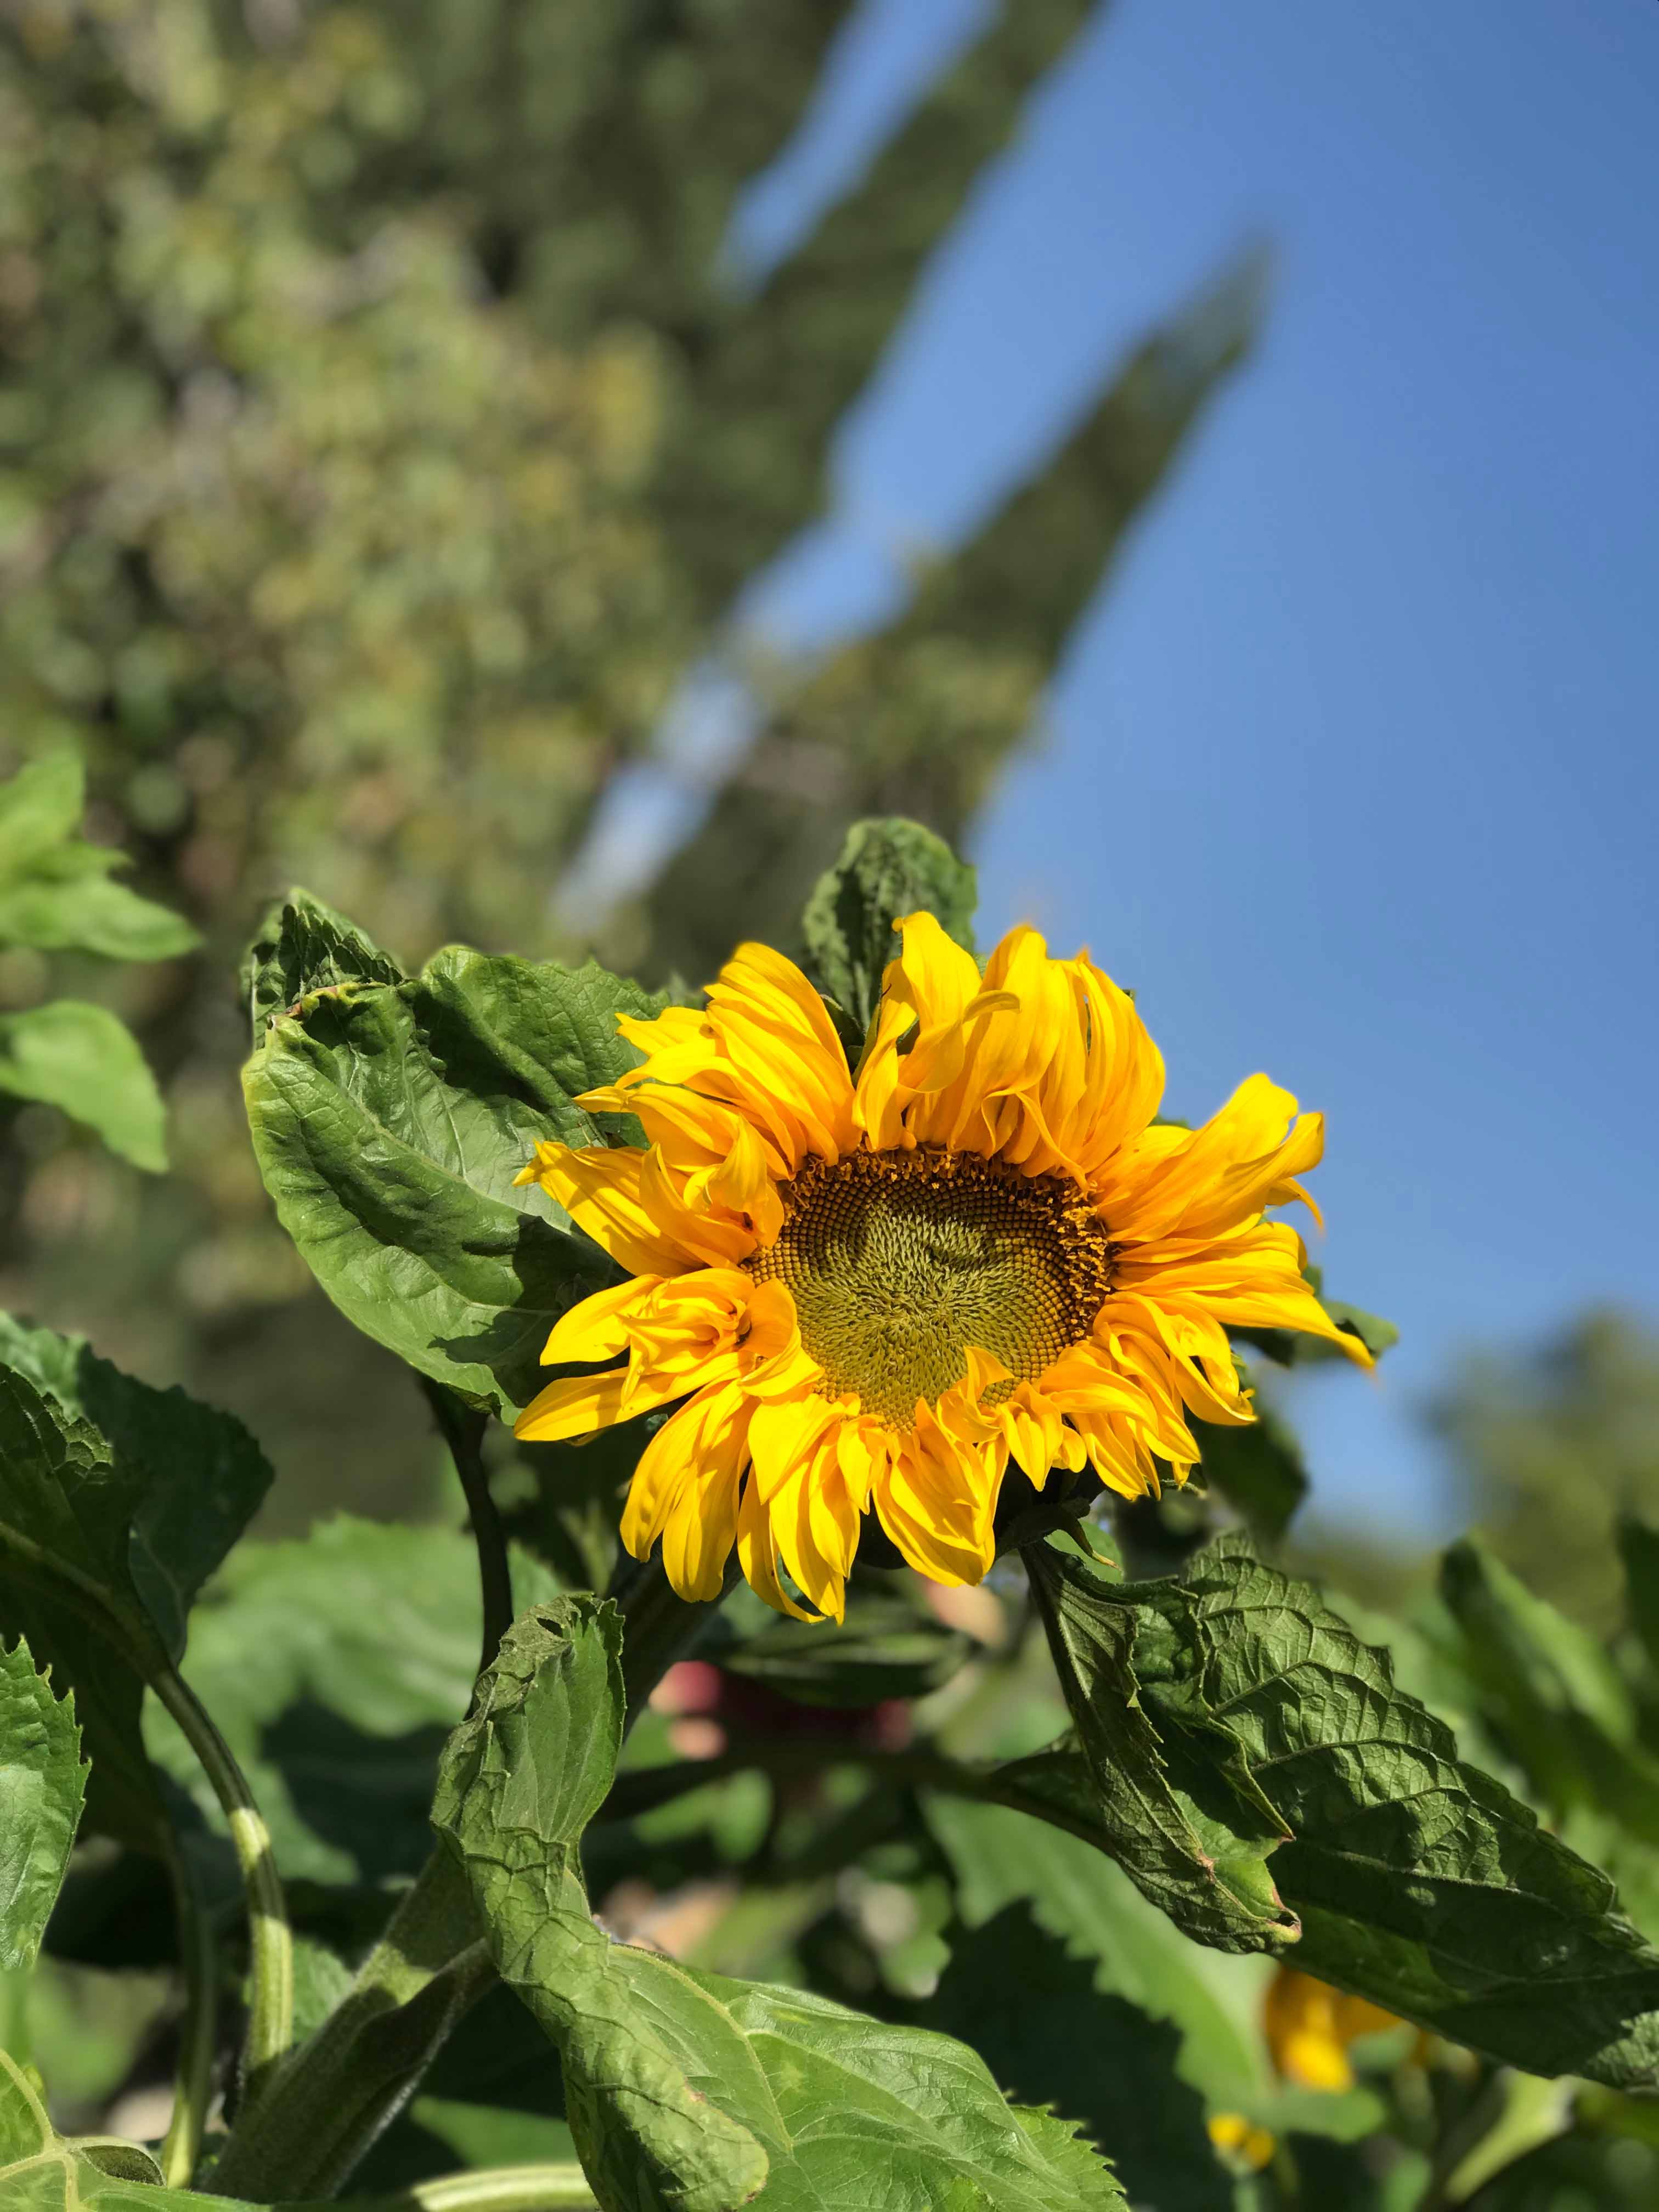 A sunflower brightens the outdoor garden area at our holistic wellness center in San Diego, CA.